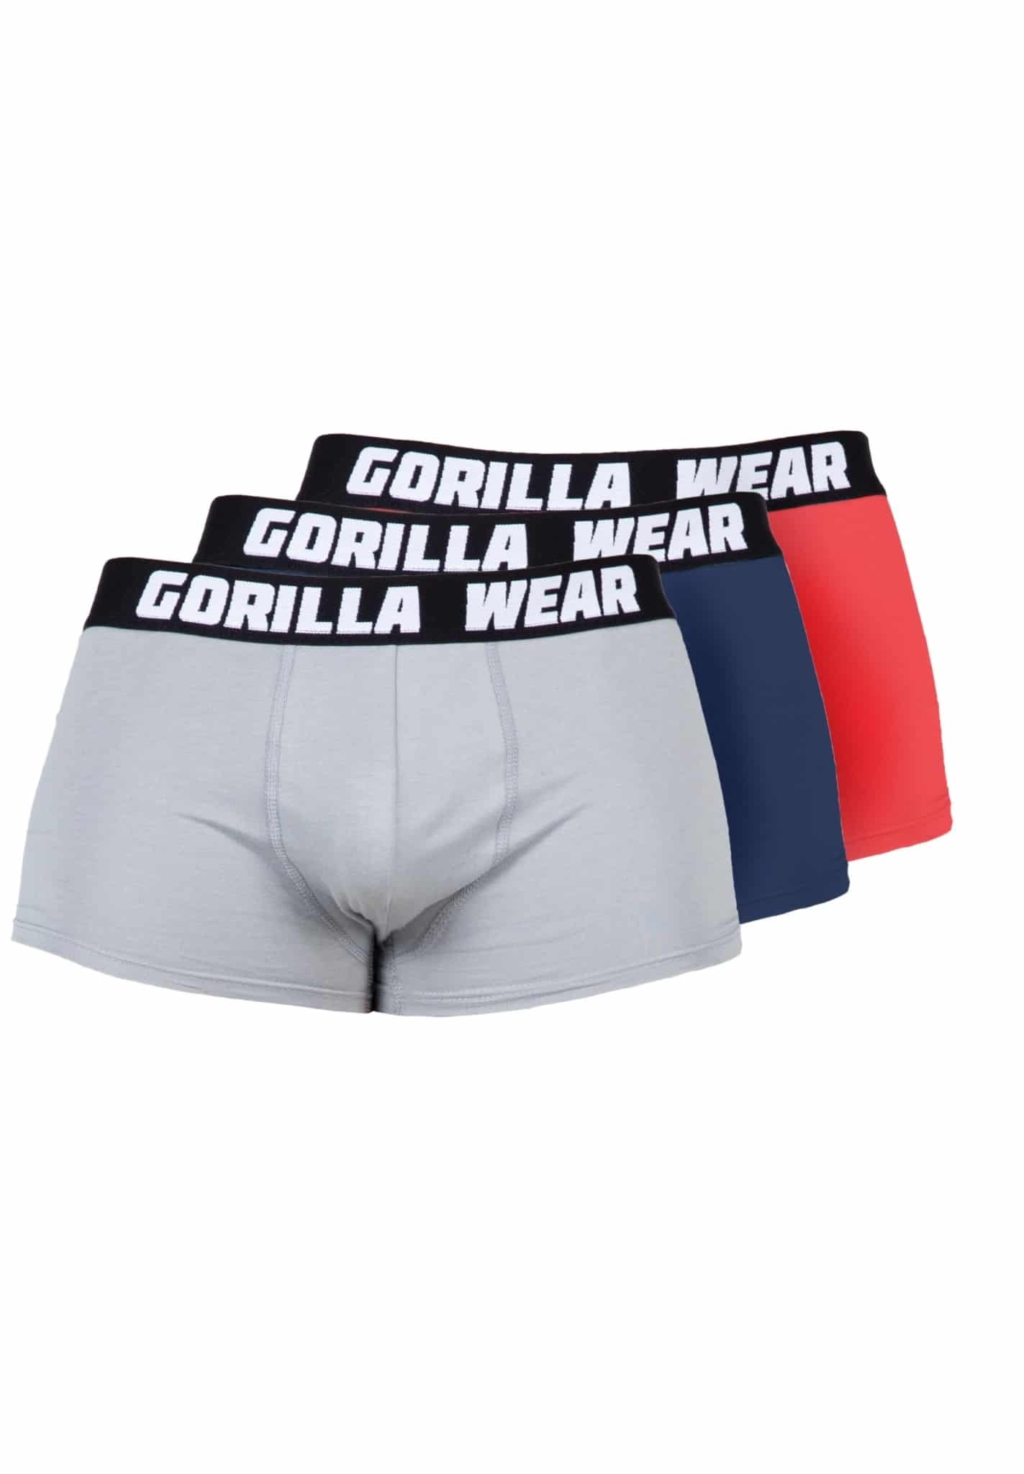 99179800 gorilla wear boxershorts 3 pack gray navy red 52 scaled